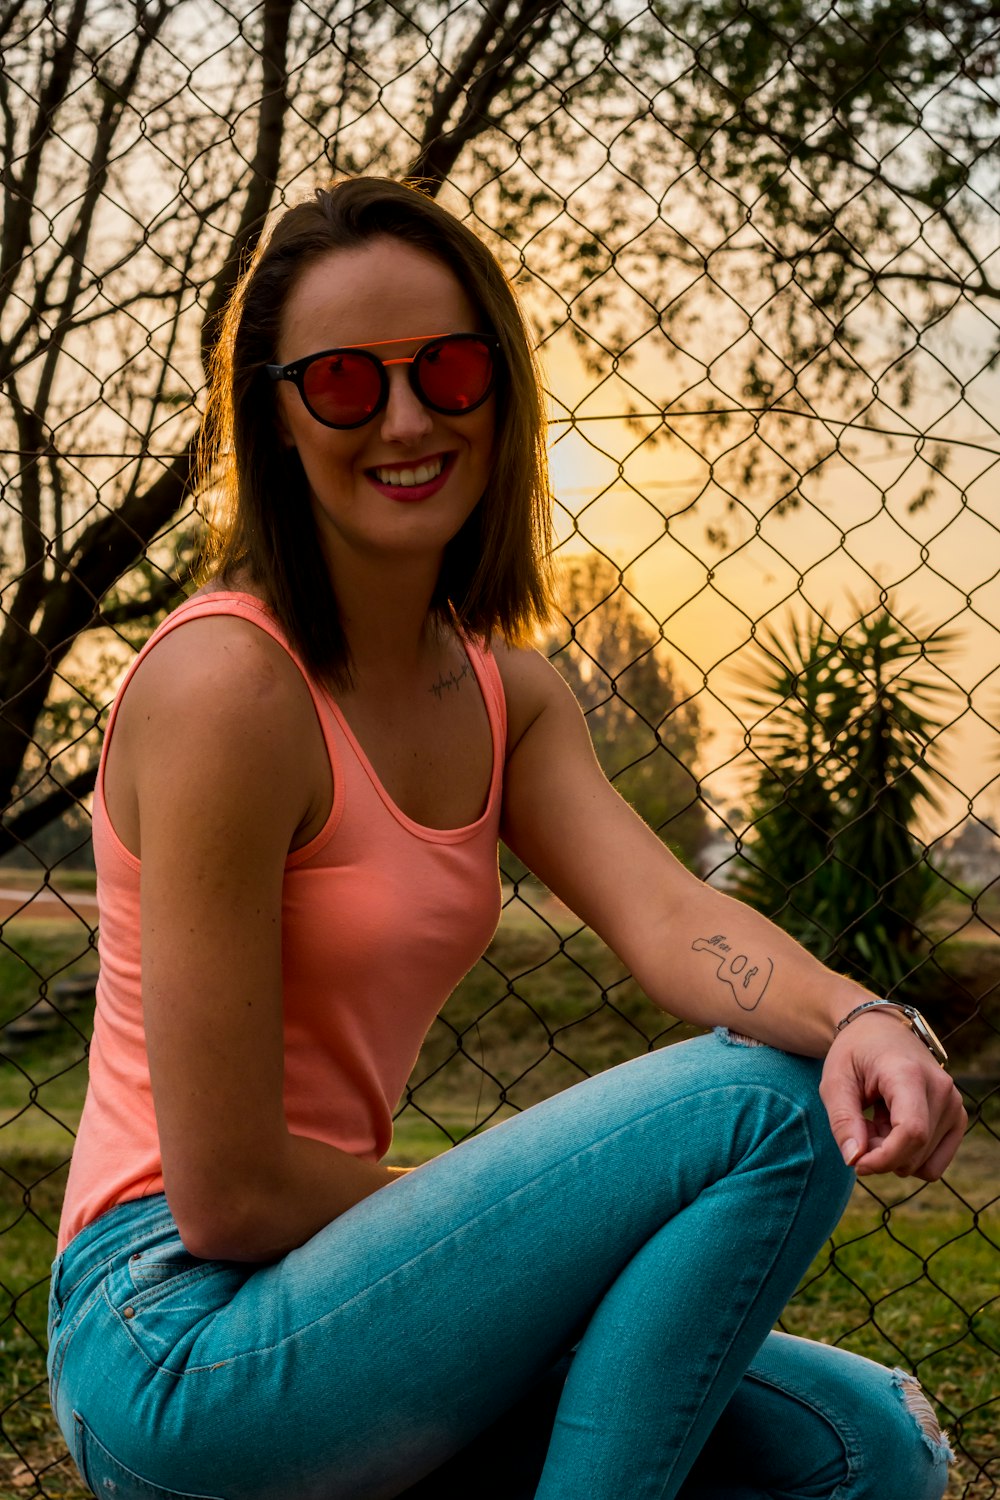 smiling woman in peach tank top and blue skinny denim jeans sitting near wire mesh fence